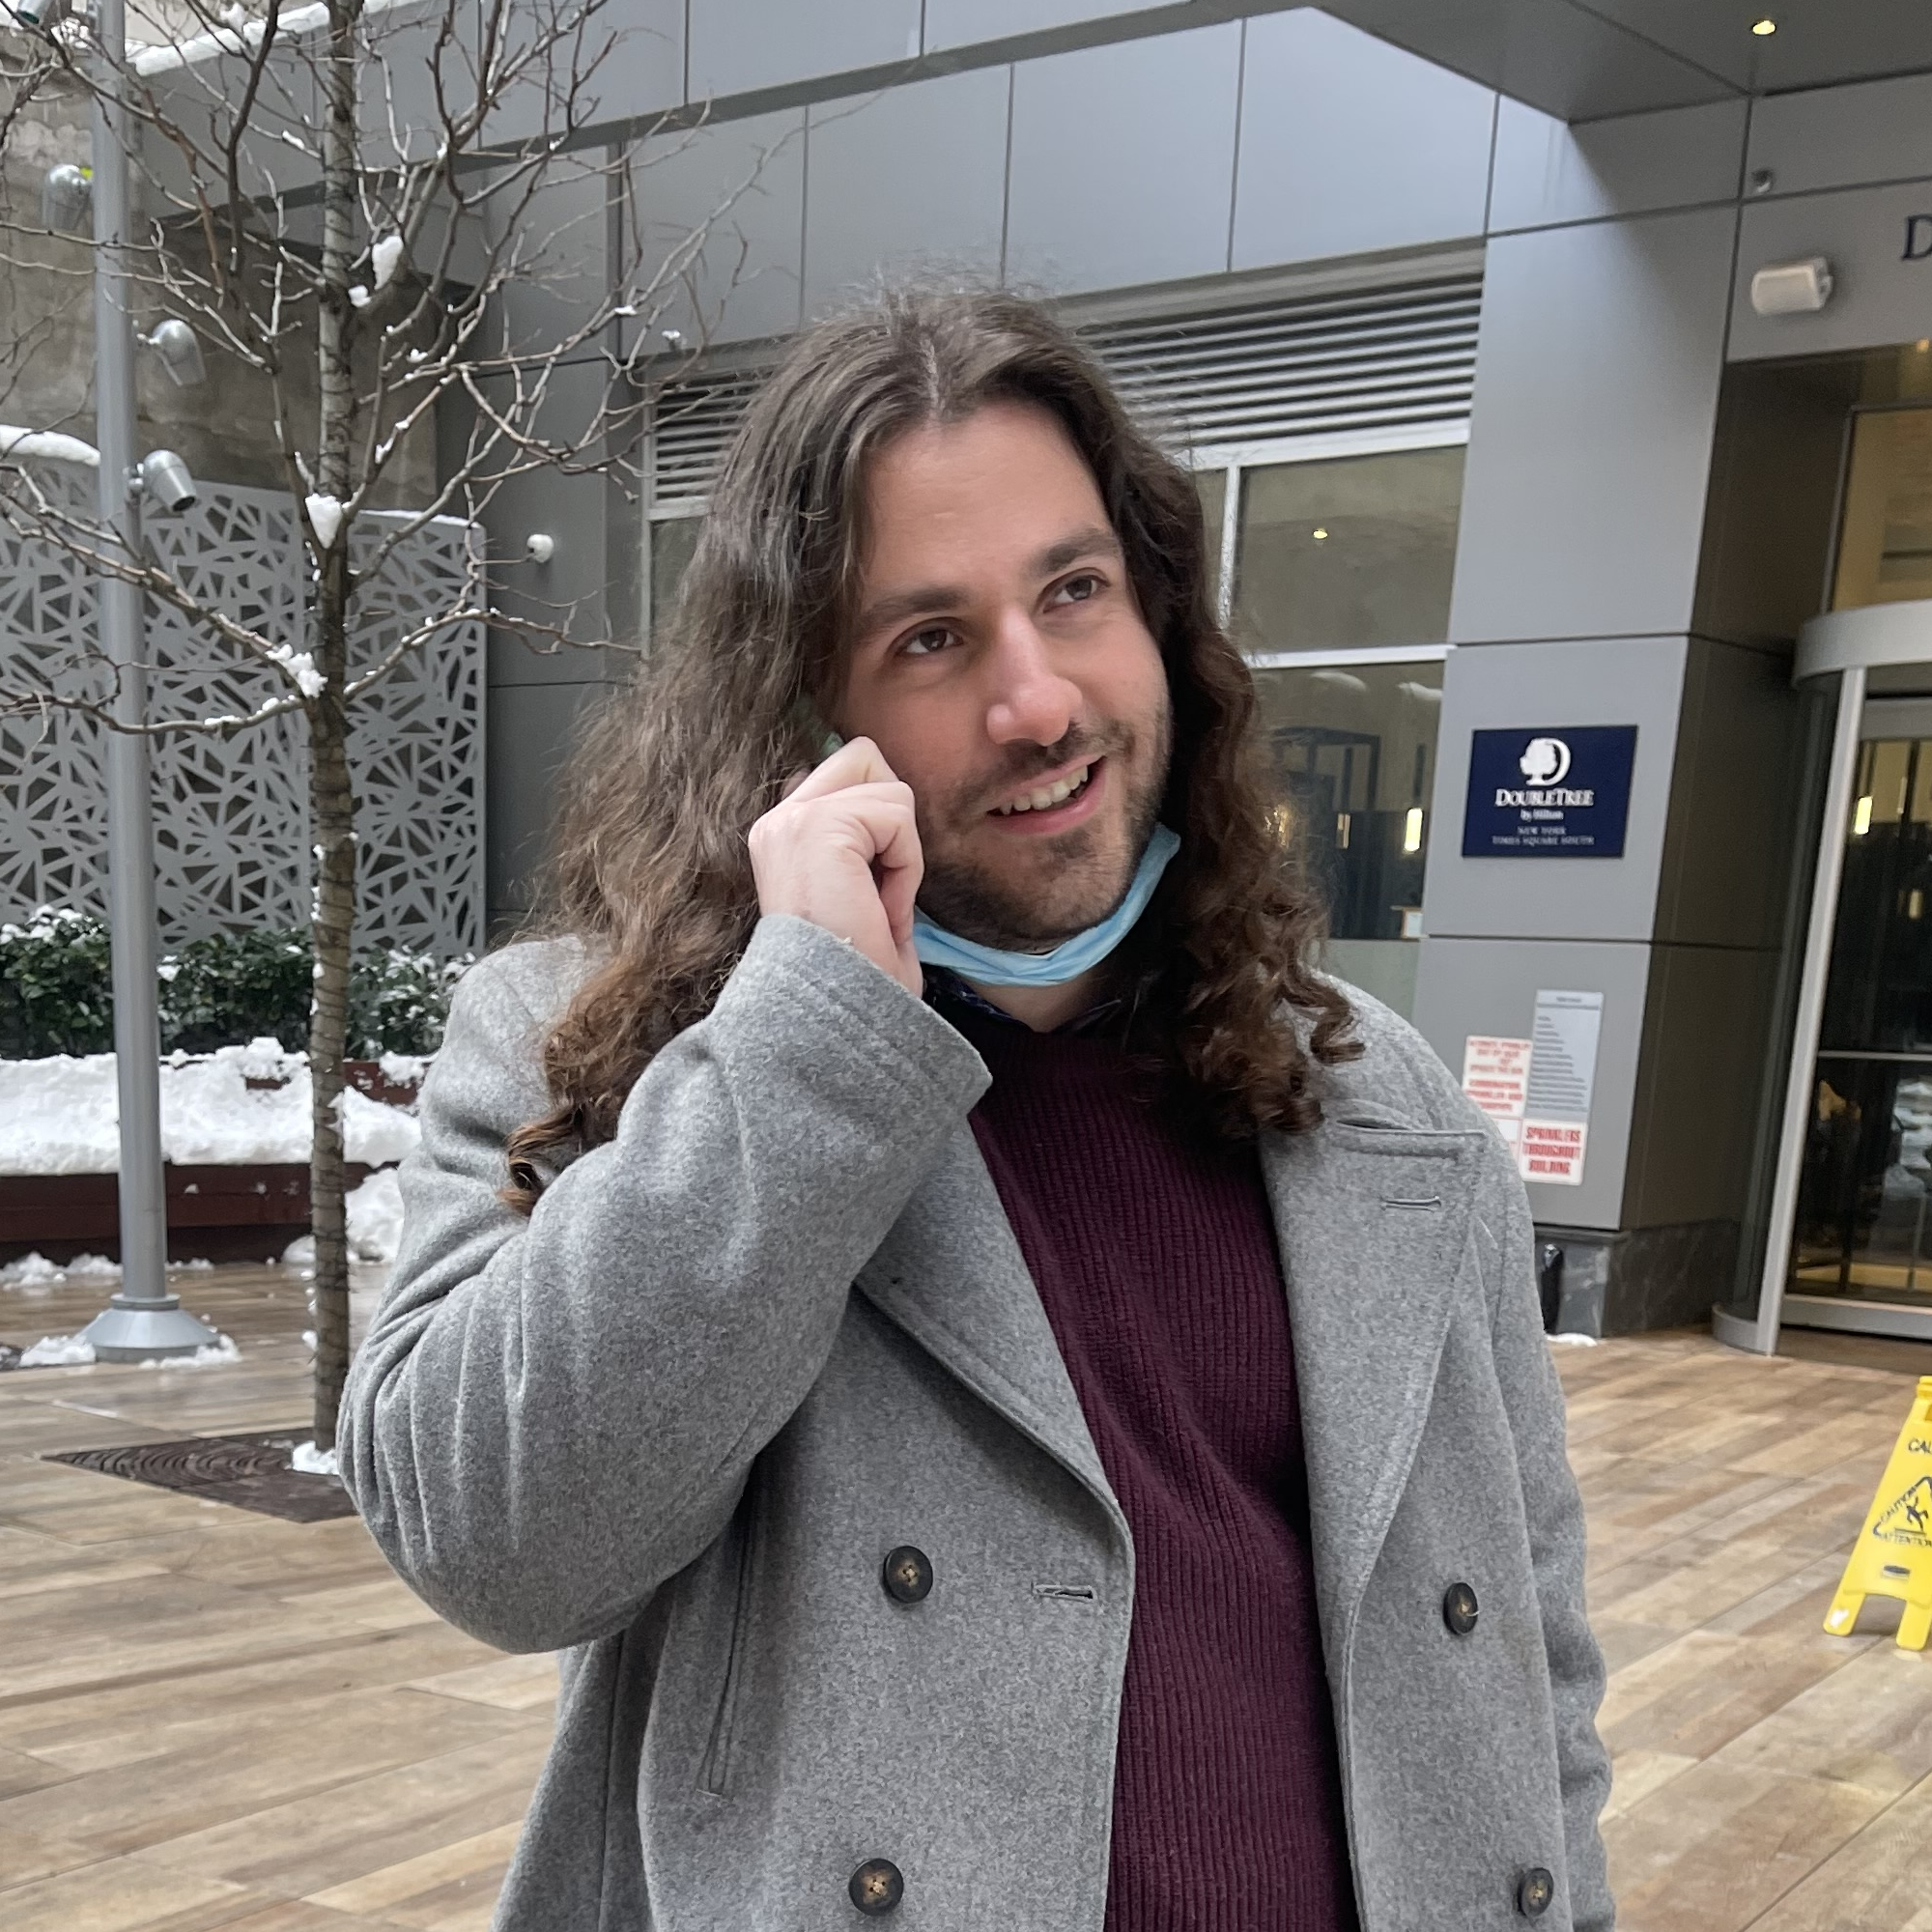 A picture of me, CJ Axisa, standing in New York City wearing a gray jacket with a maroon sweater underneath while talking on the phone and smiling at a 3/4 view.